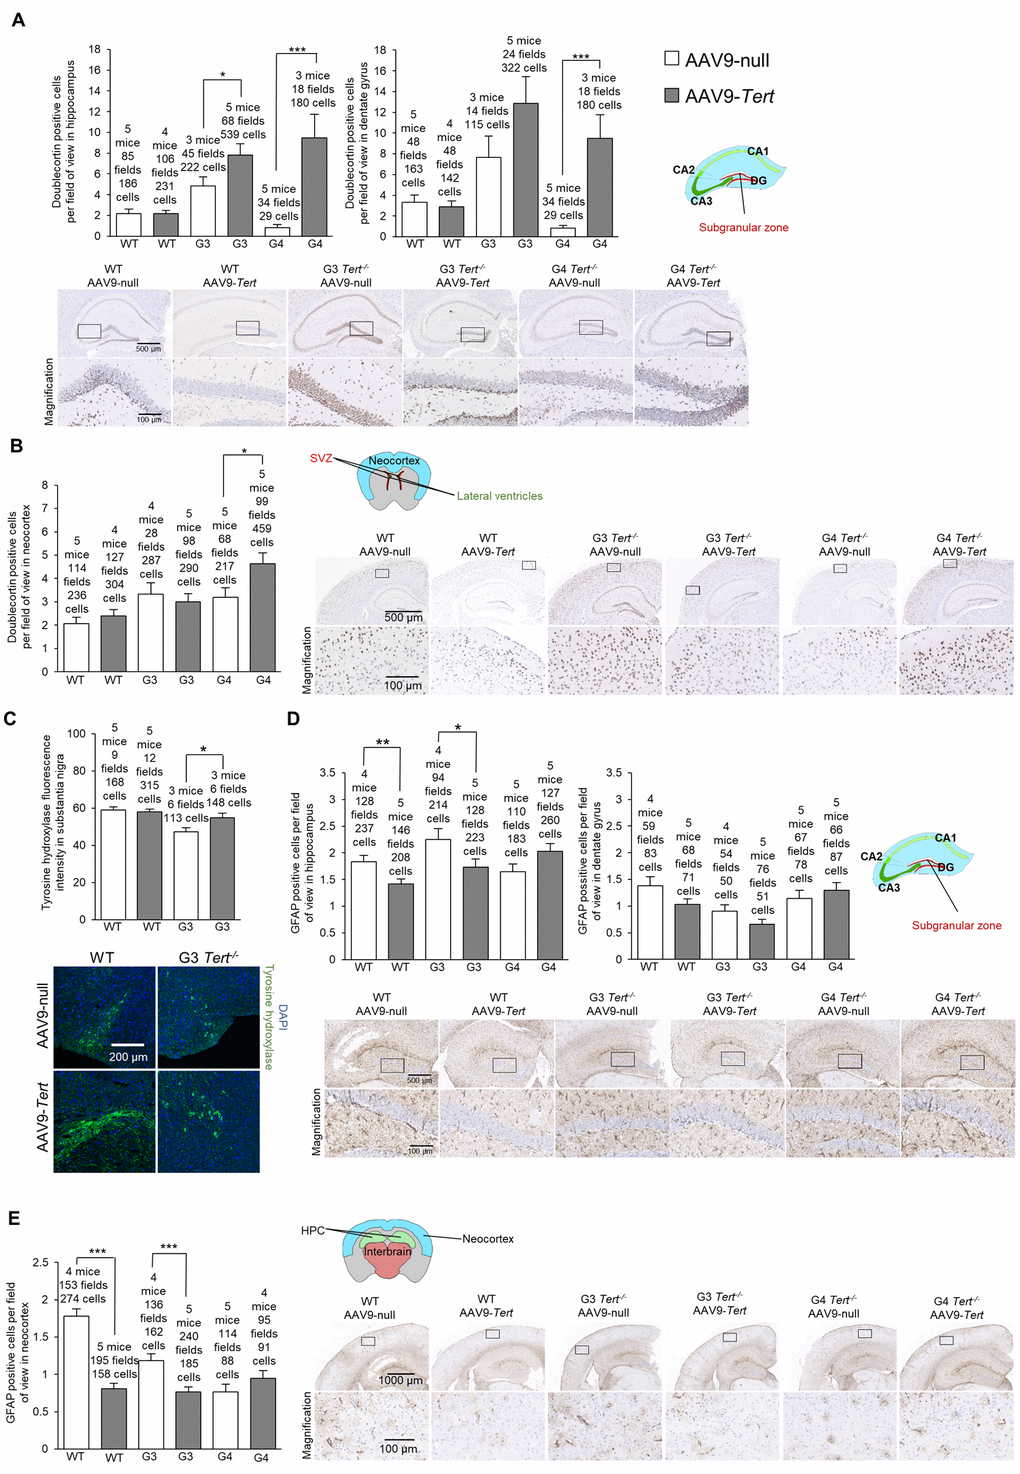 Treatment with AAV9-Tert results in more neurogenesis and less inflammation in the brain. (A-B) Quantification and representative images of the histopathology for doublecortin in the hippocampus (A), dentate gyrus (A), and neocortex (B). (C) Immunofluorescence of tyrosine hydroxylase in the substantia nigra. (D-E) Quantification and representative images of the histopathology for glial fibrillary acidic protein (GFAP) in the hippocampus (D), dentate gyrus (D), and (E) neocortex. Data represent the mean ±SE of analyzed mice within each group. The number of mice analyzed per group is indicated. The t-test was used for statistical analysis. *p